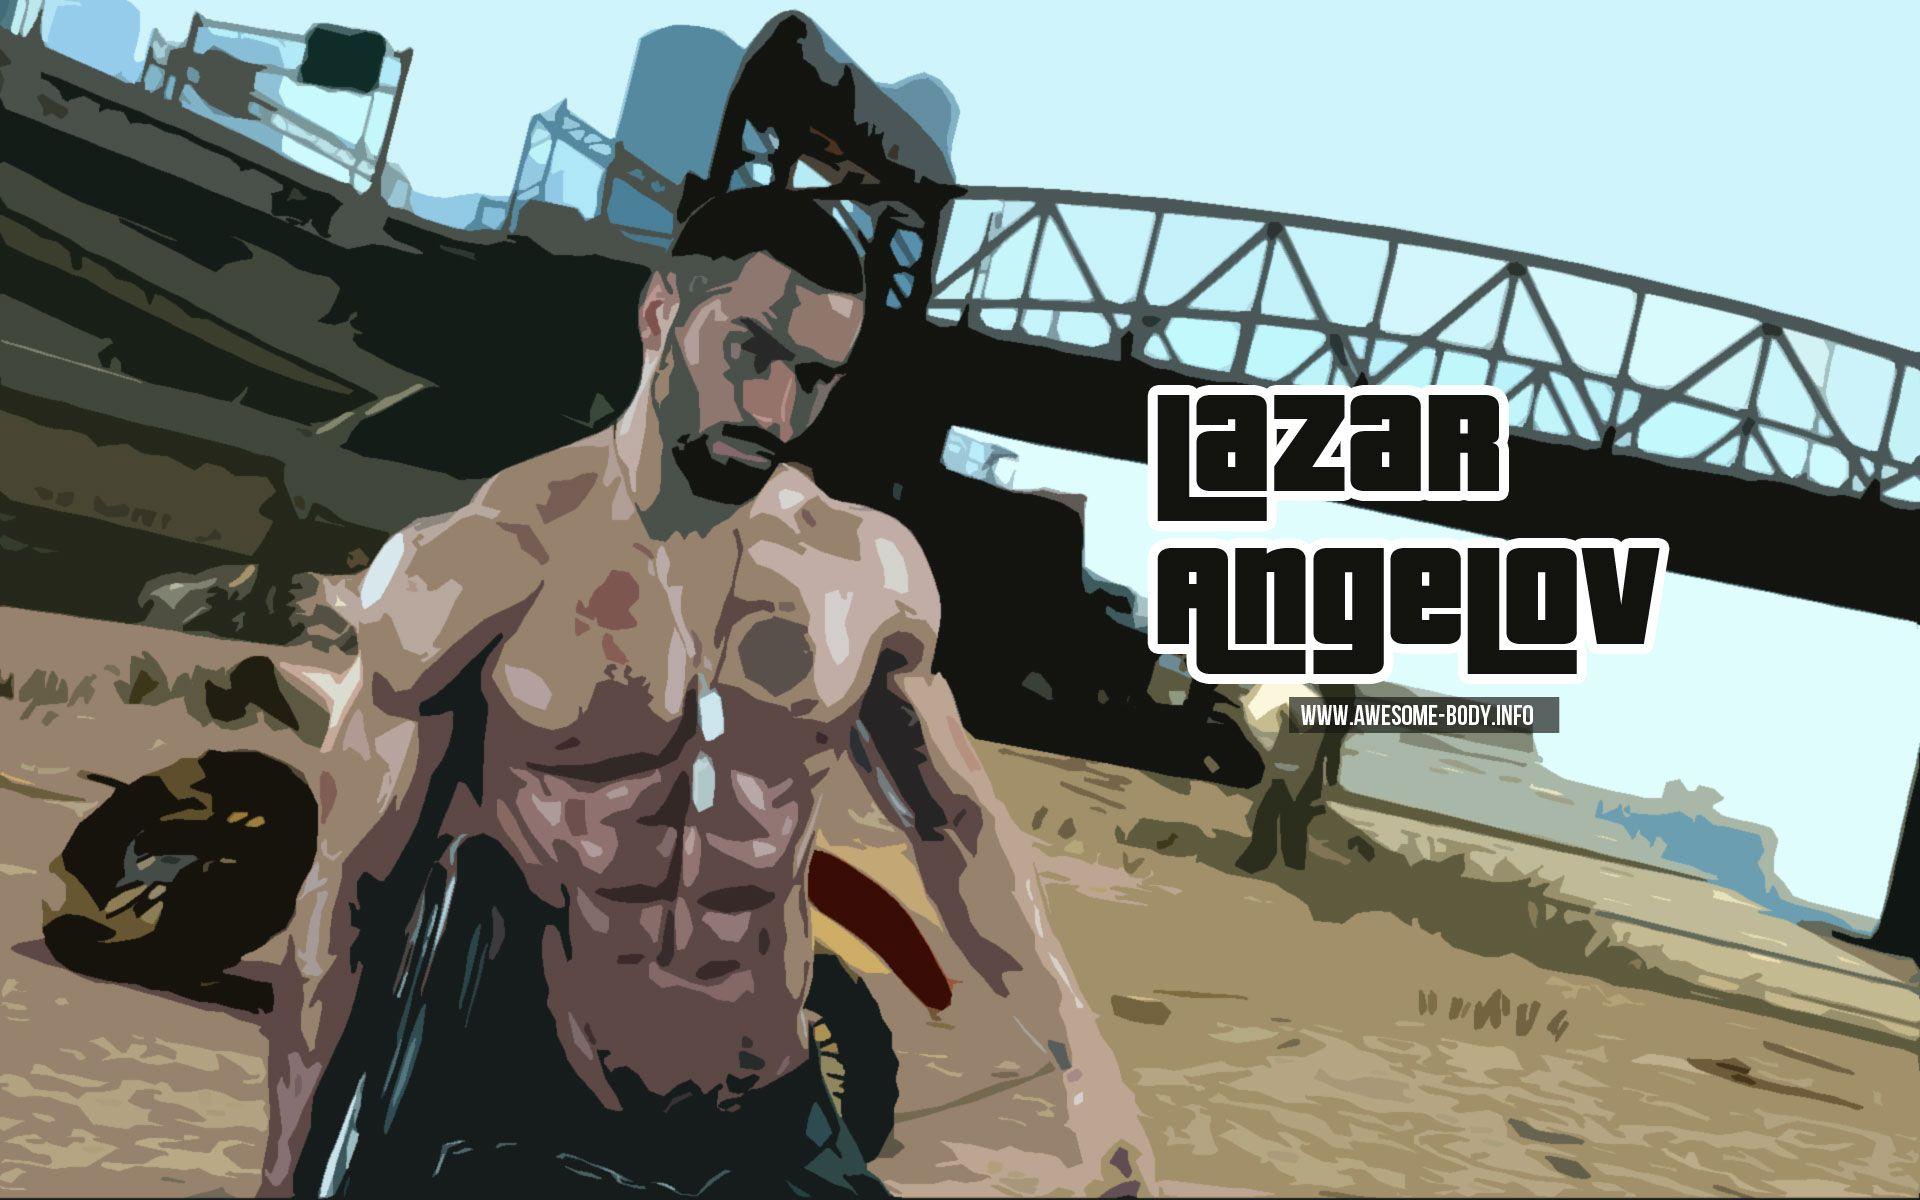 Lazar Angelov photo. Awesome body wallpaper and motivation quotes